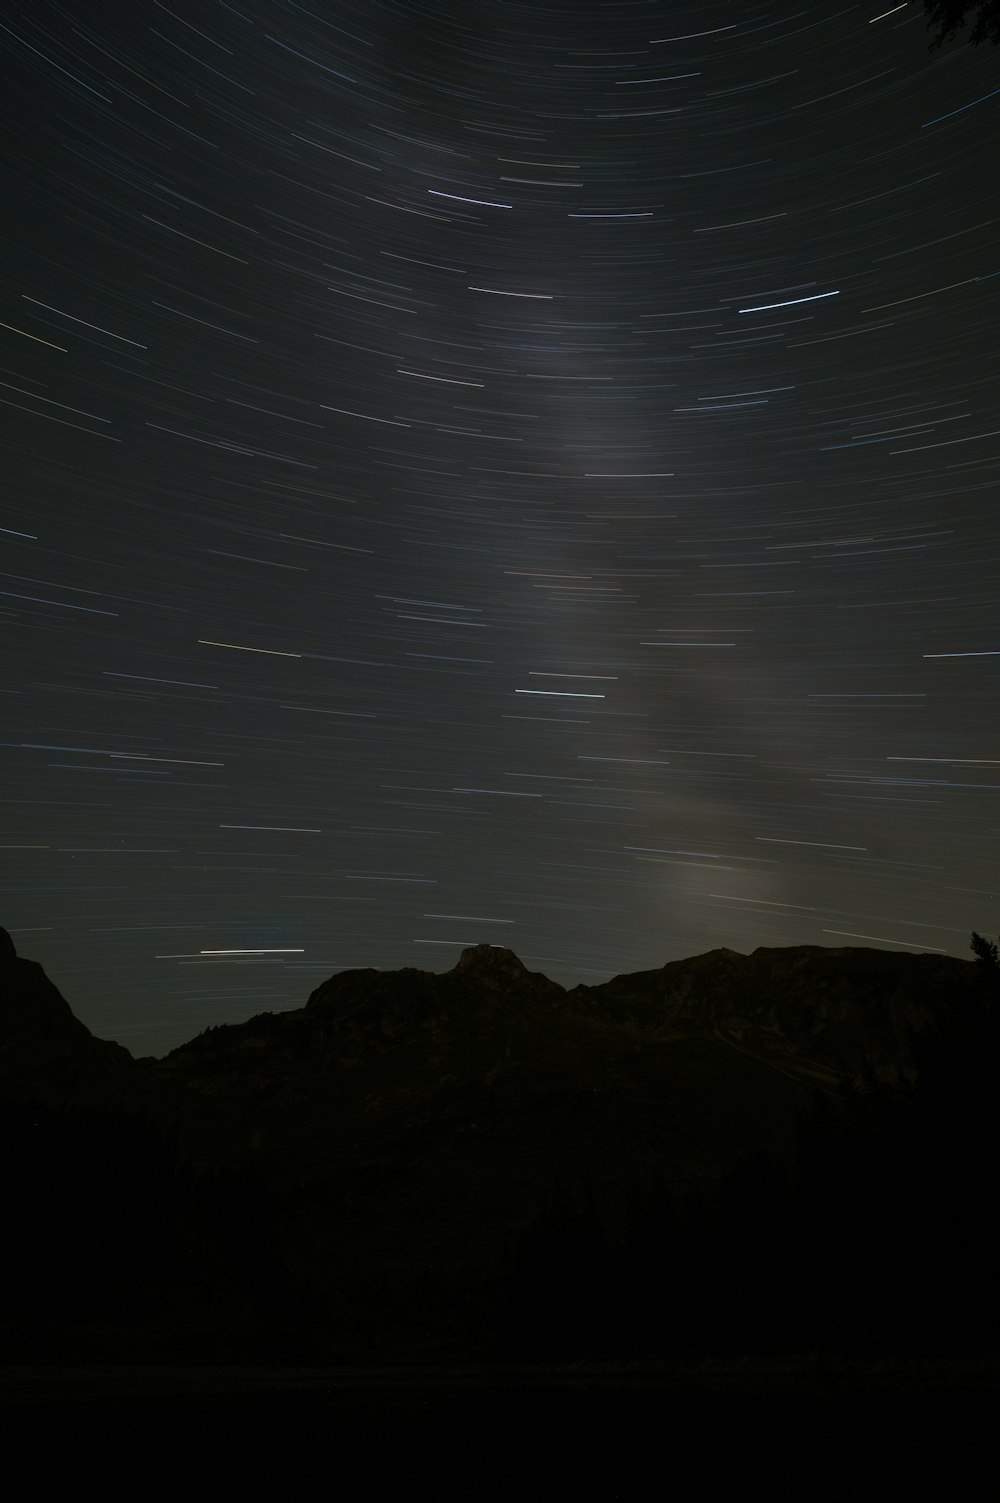 a view of the night sky with stars and a mountain range